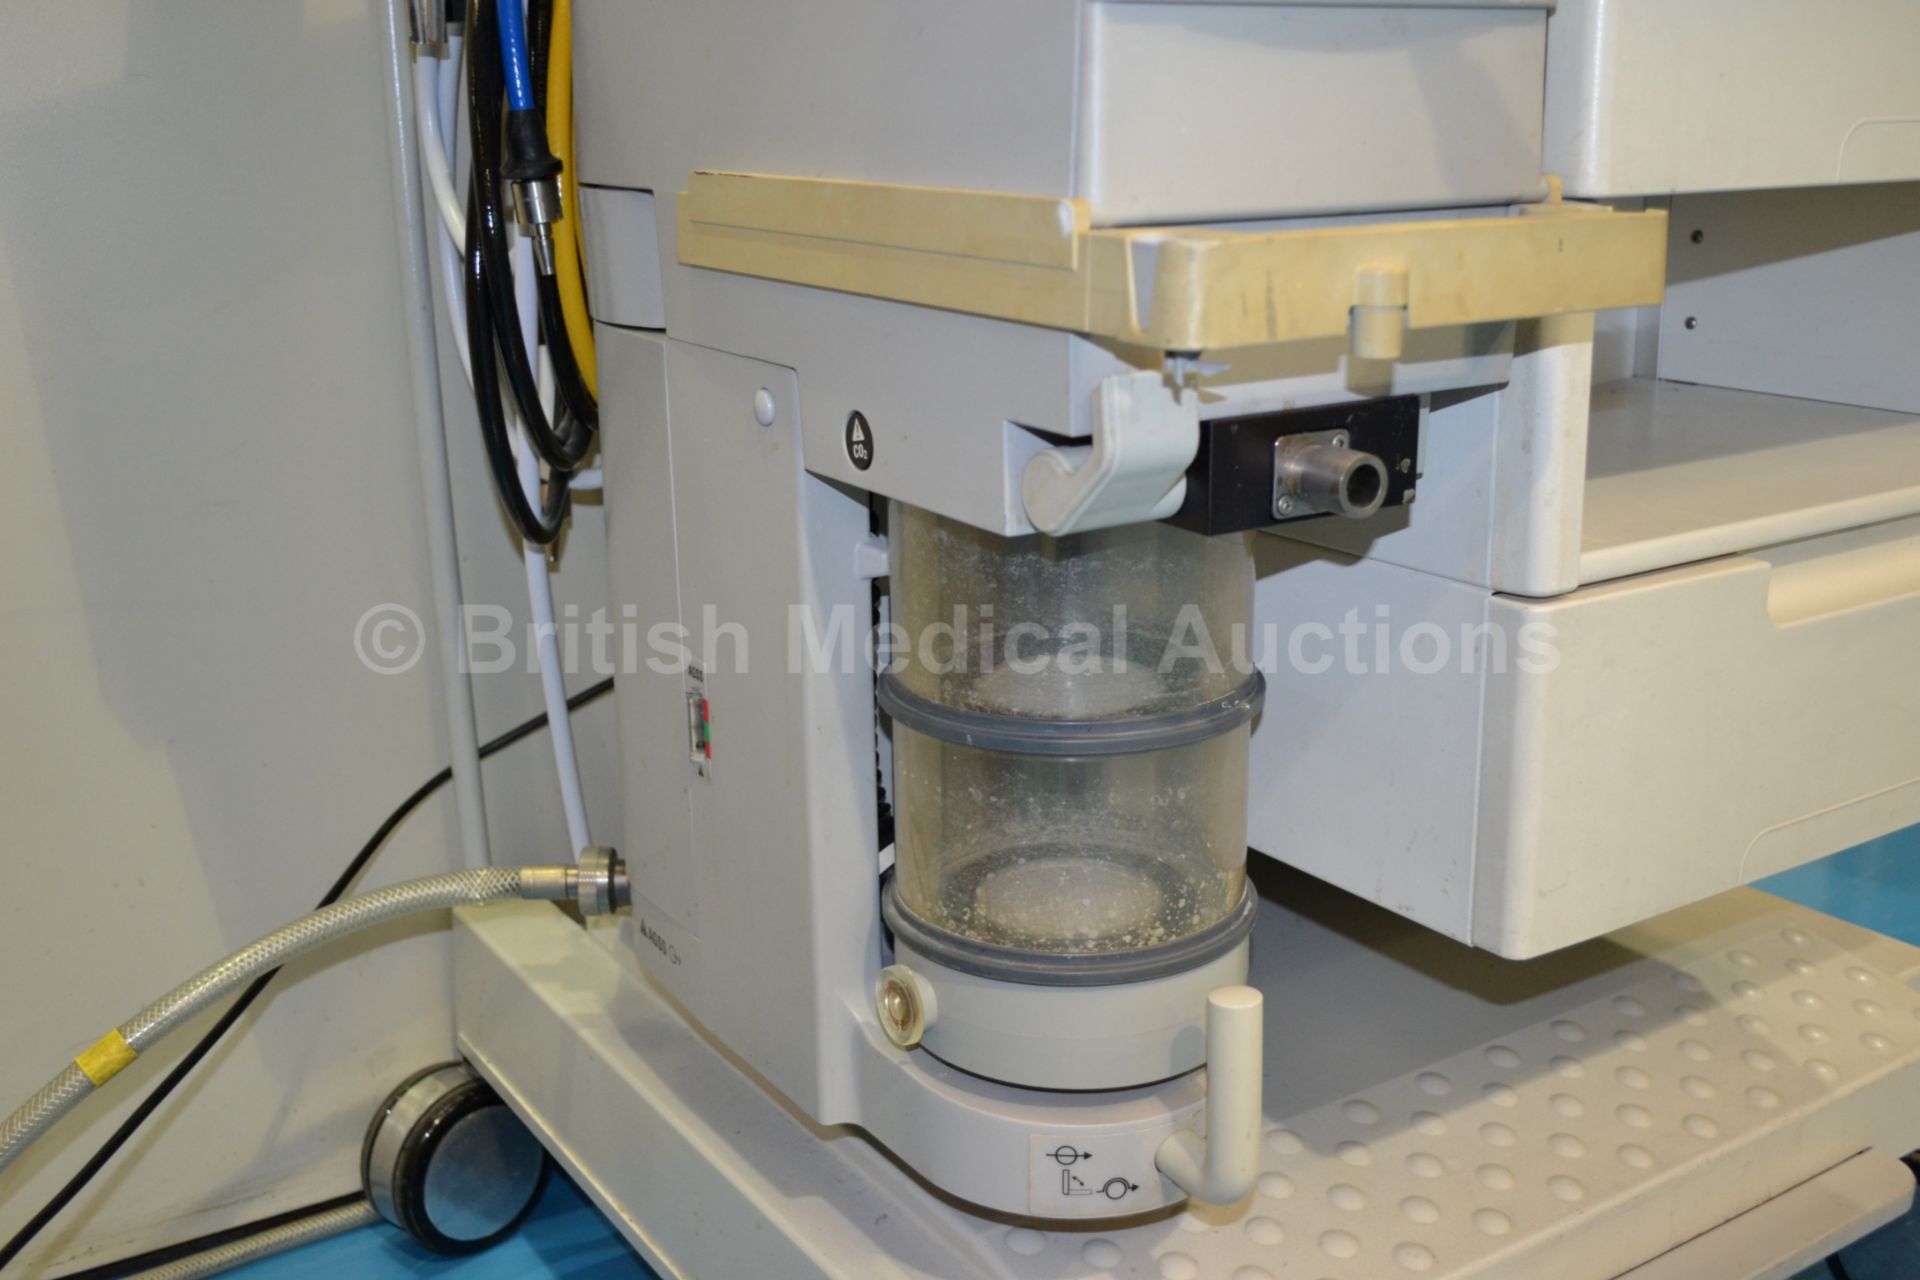 Datex Ohmeda Aestiva/5 Anaesthetic Trolley with Da - Image 5 of 7